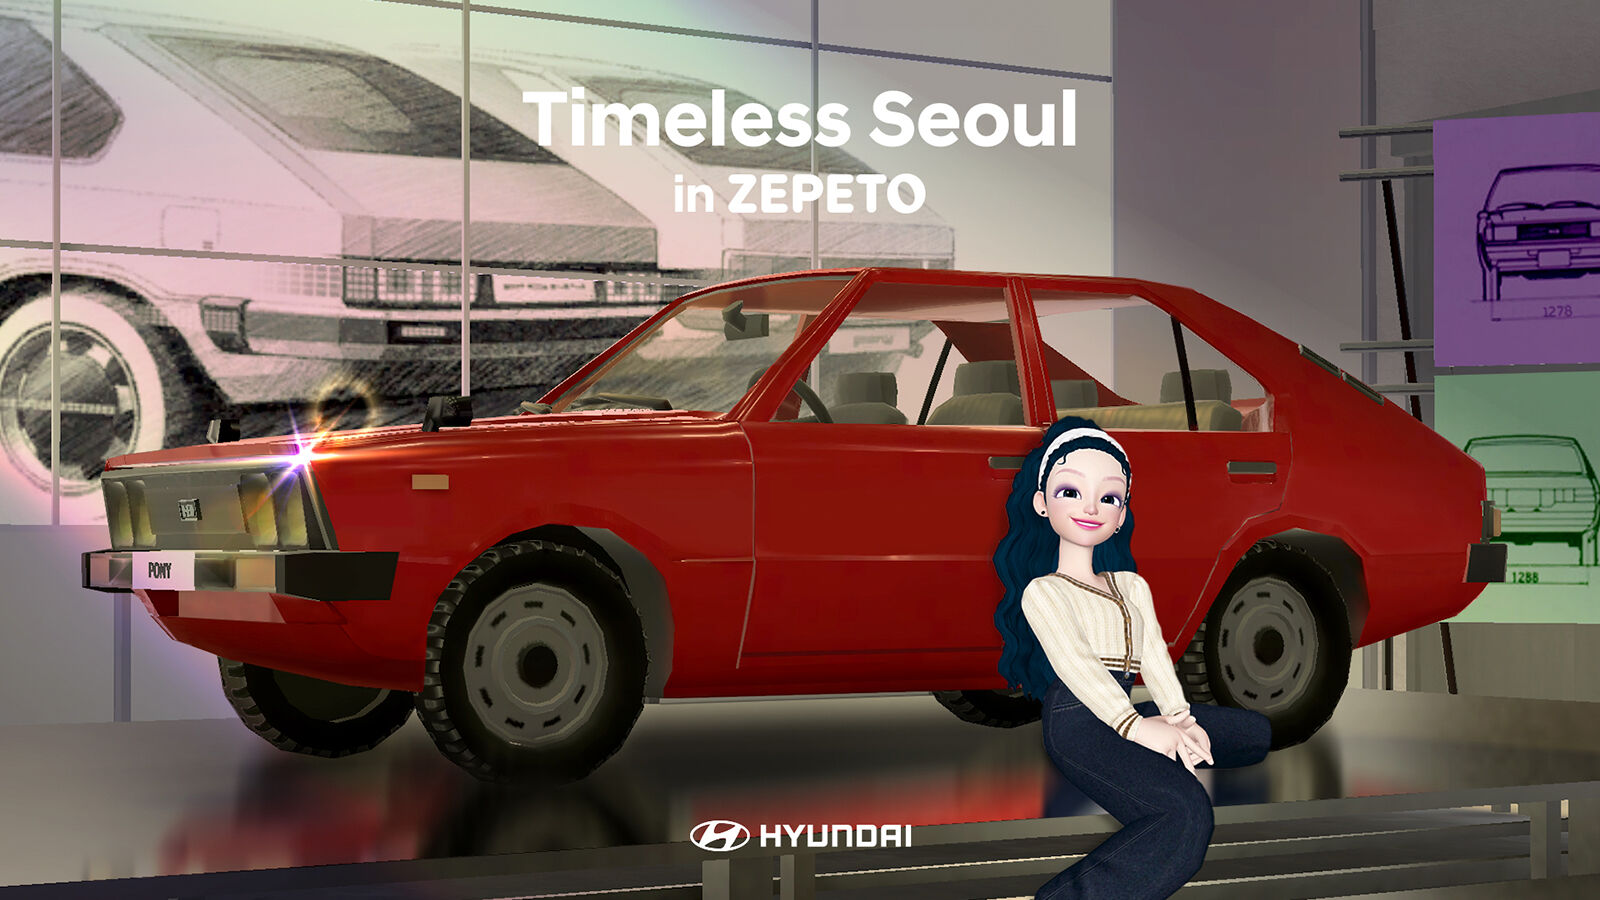 The Heritage Hall - Timeless Seoul in ZEPETO